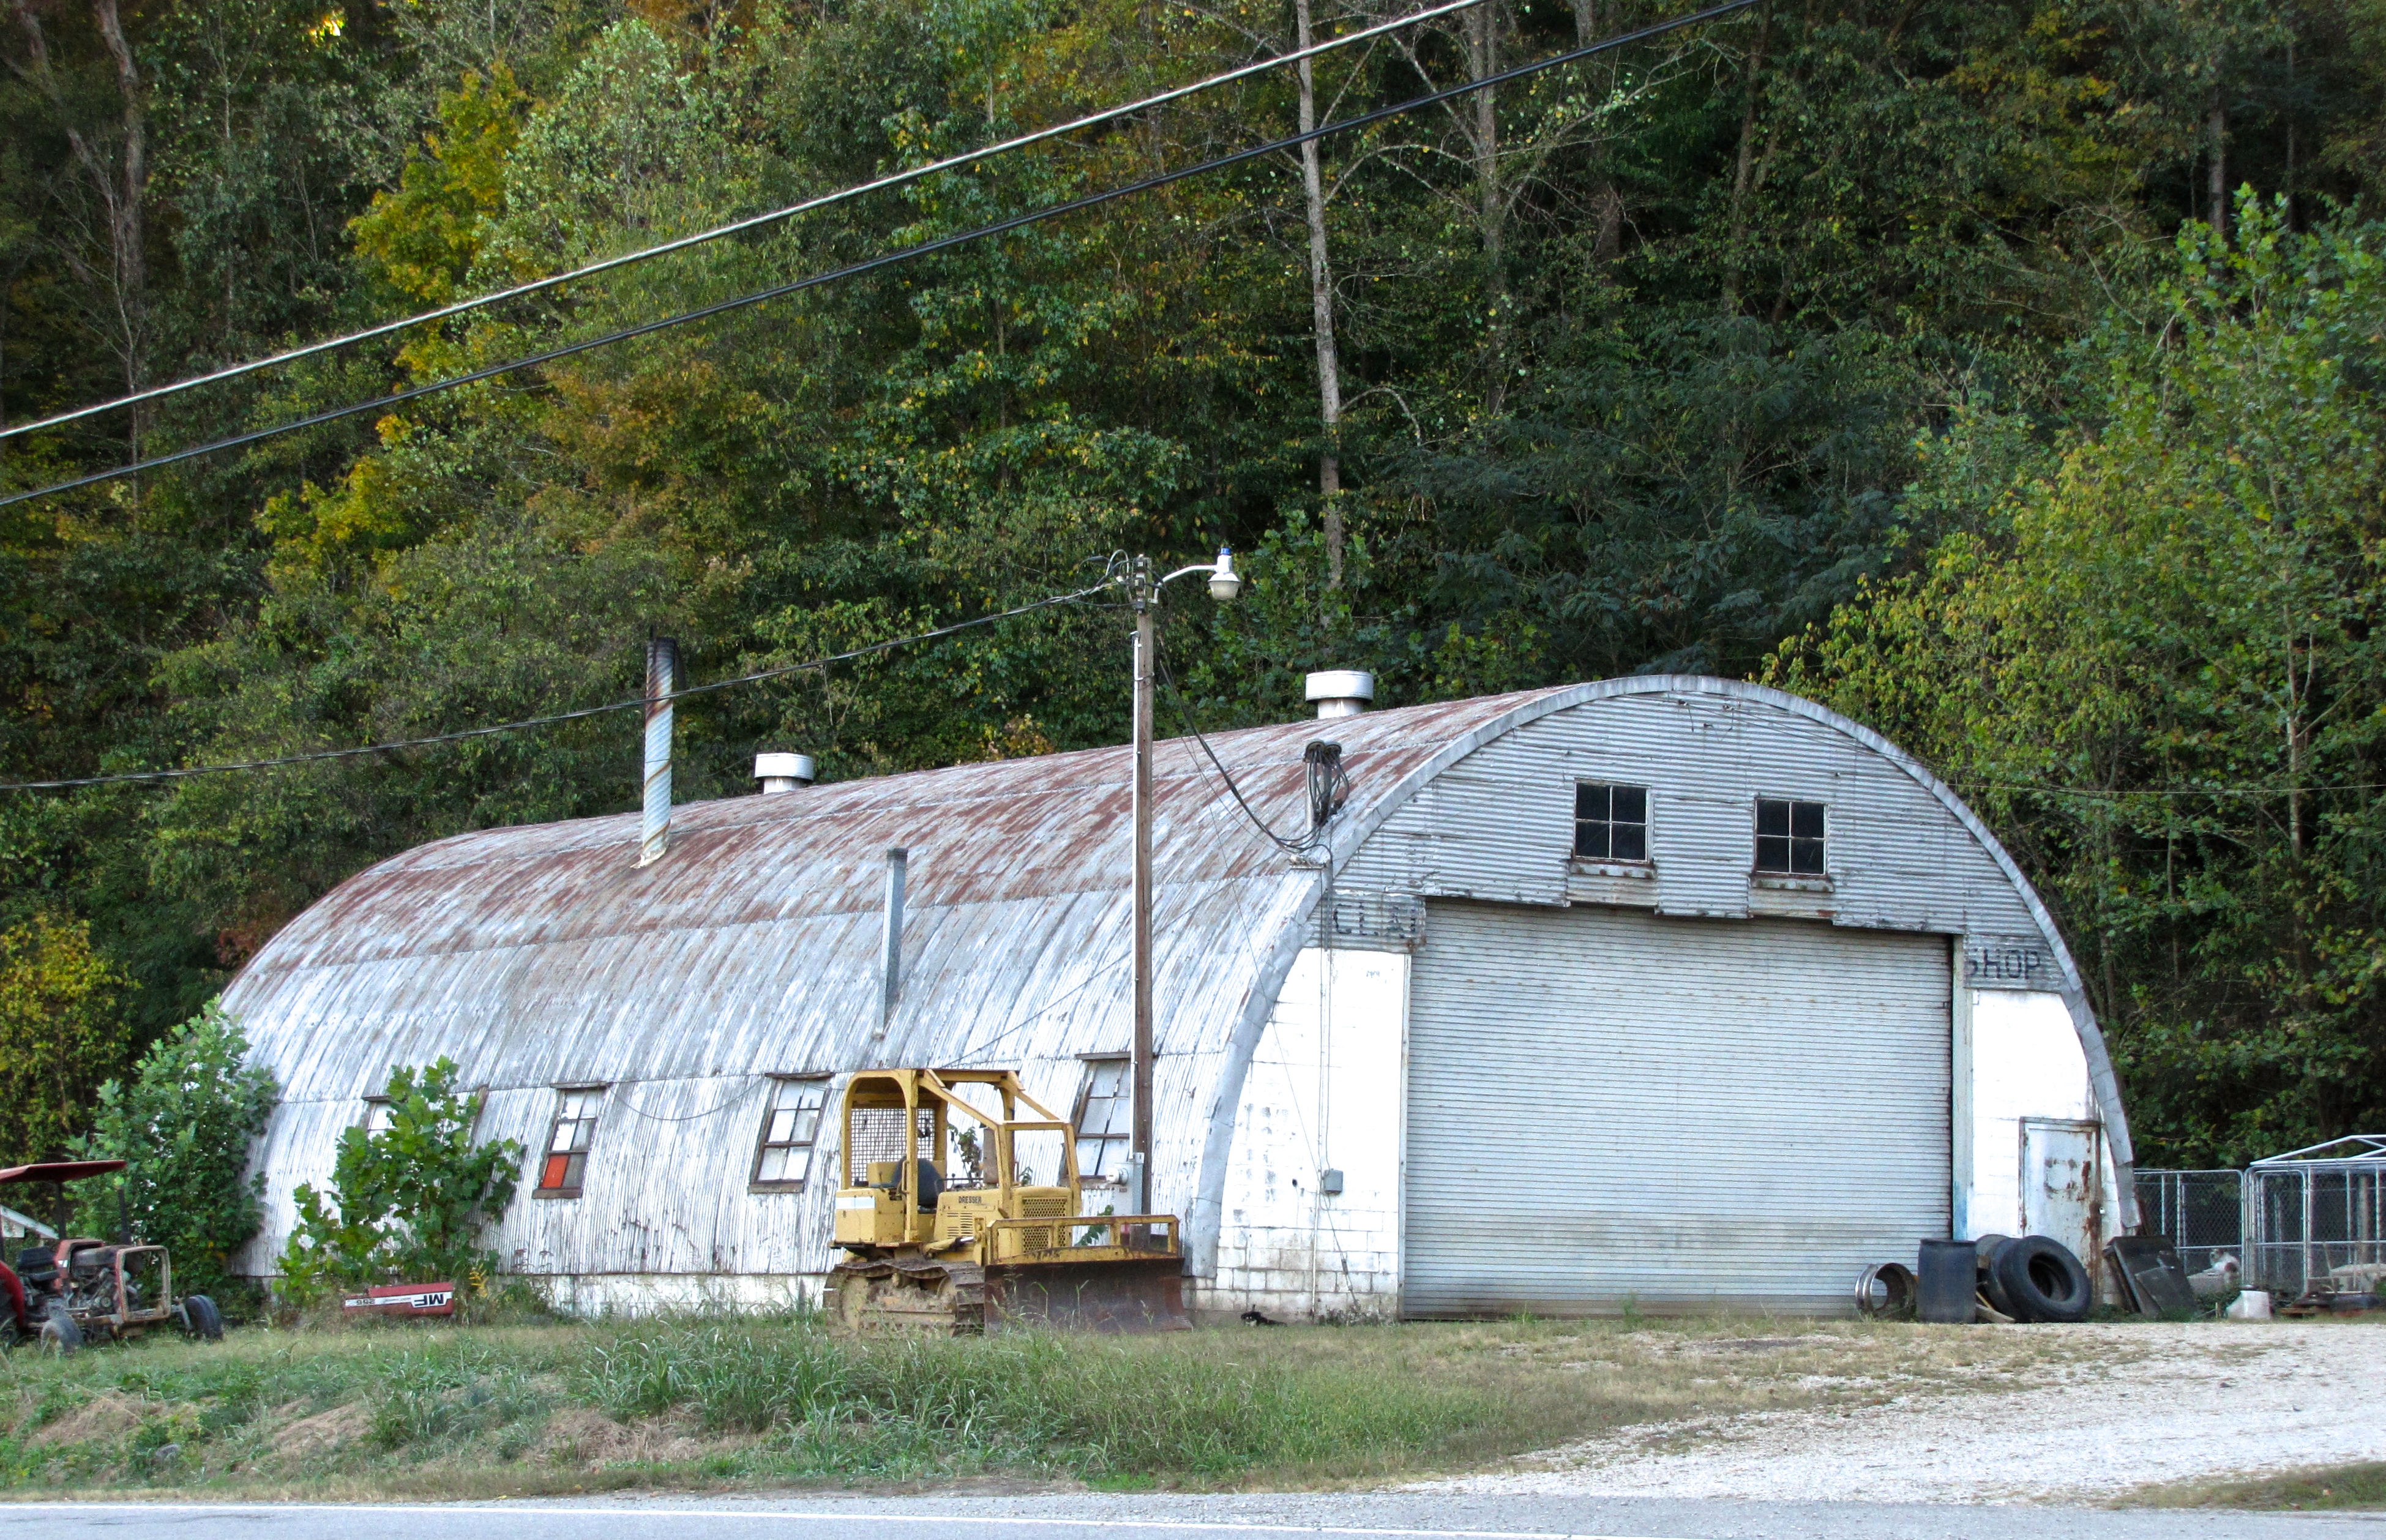 quonset hut in Grants Pass, OR